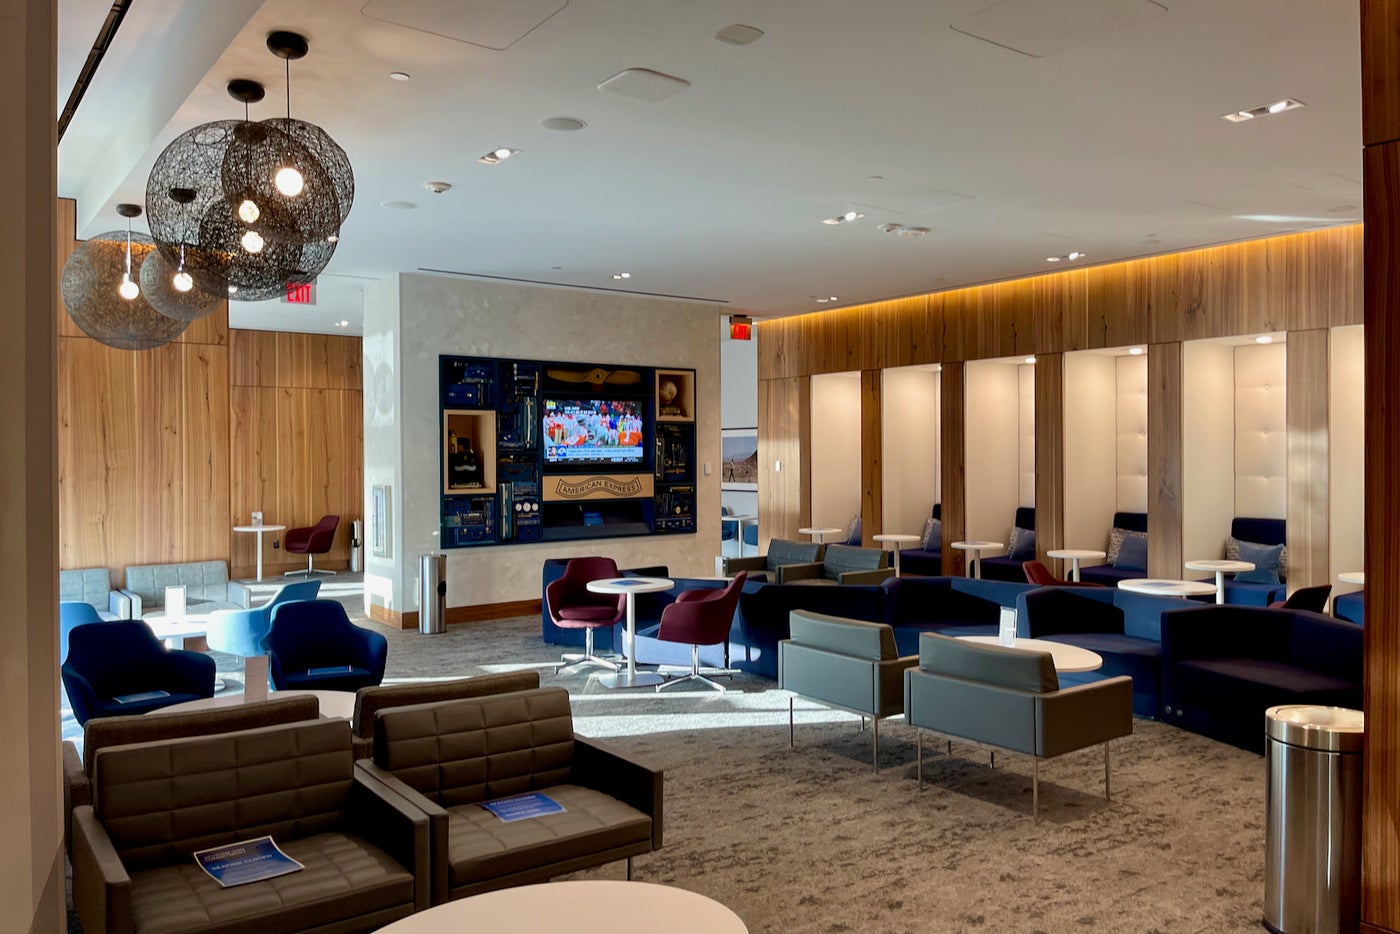 Amex reveals updated opening dates for new Centurion Lounges